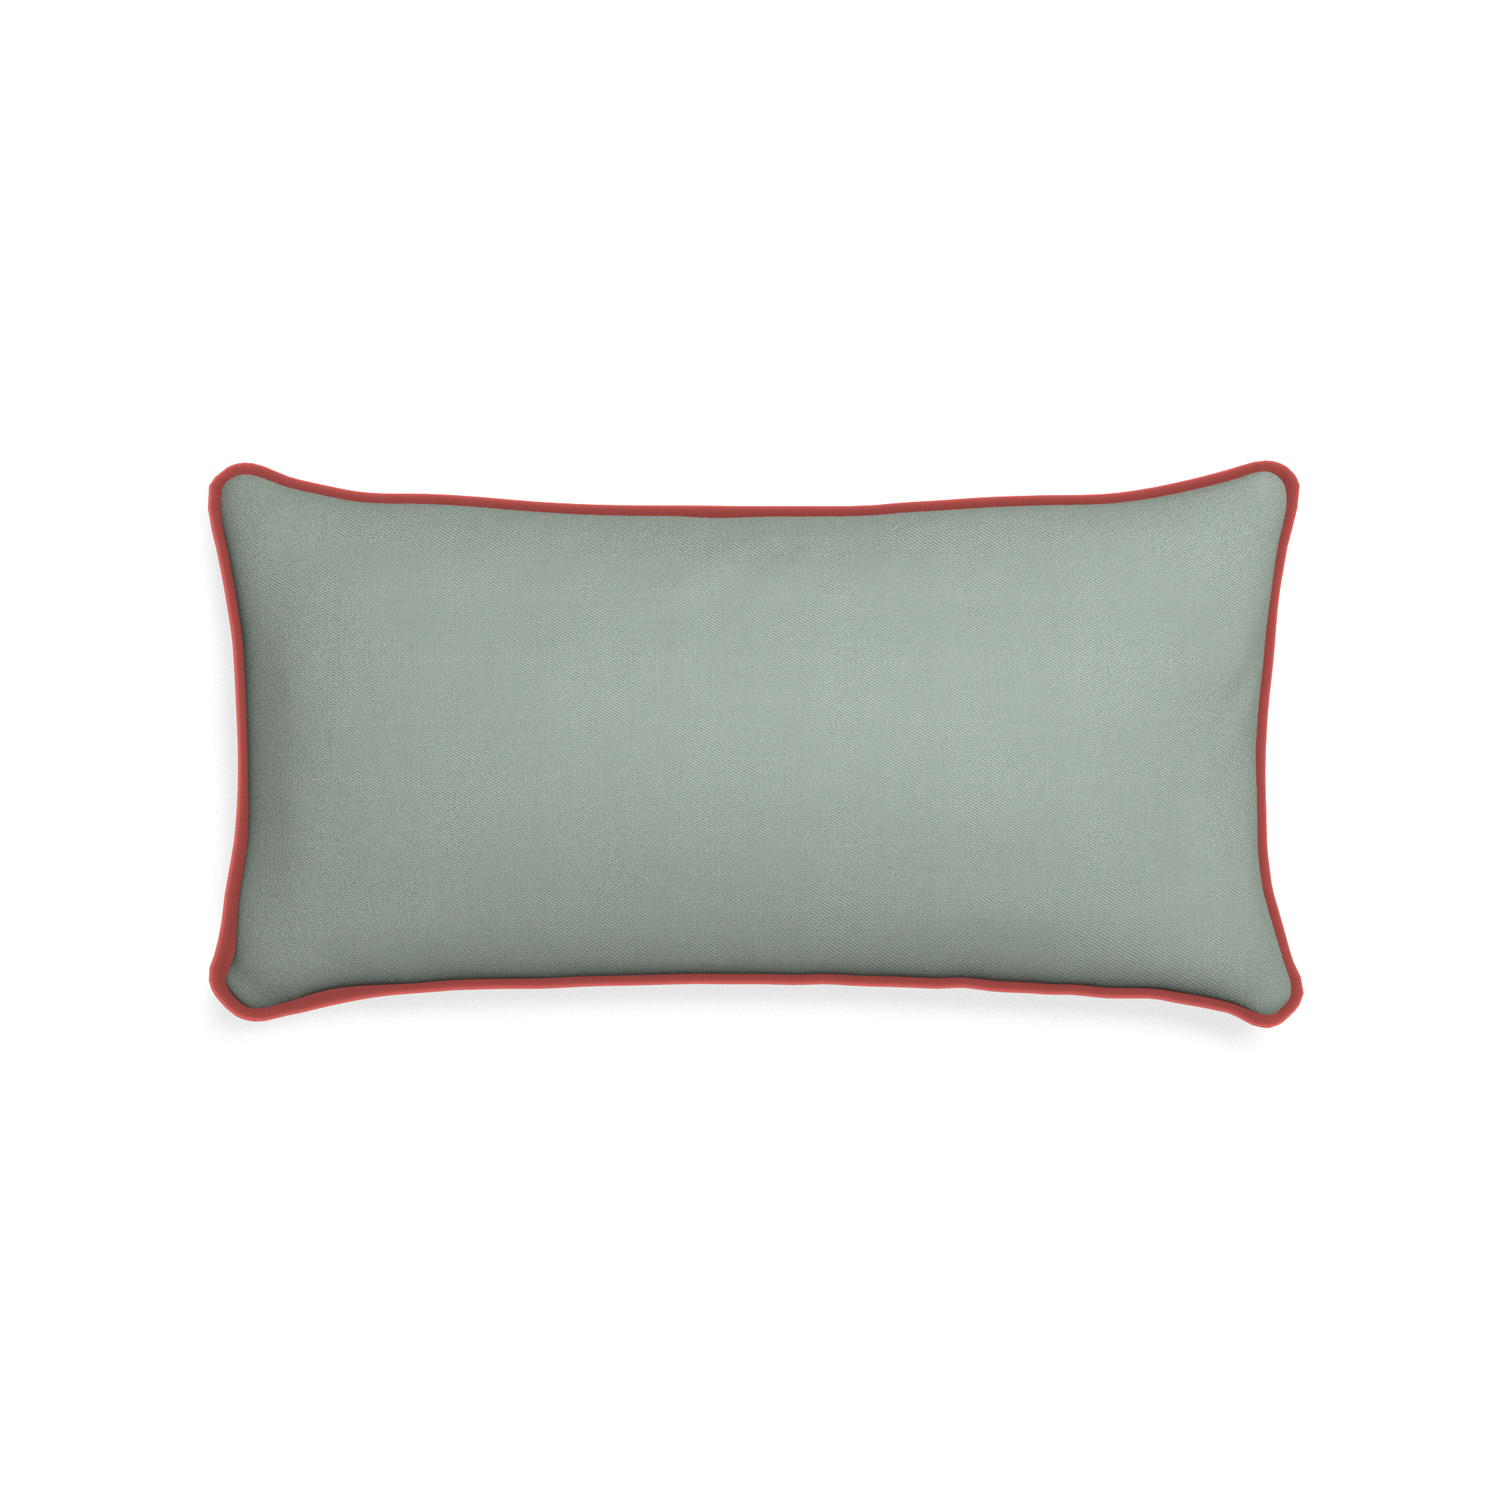 Midi-lumbar sage custom sage green cottonpillow with c piping on white background